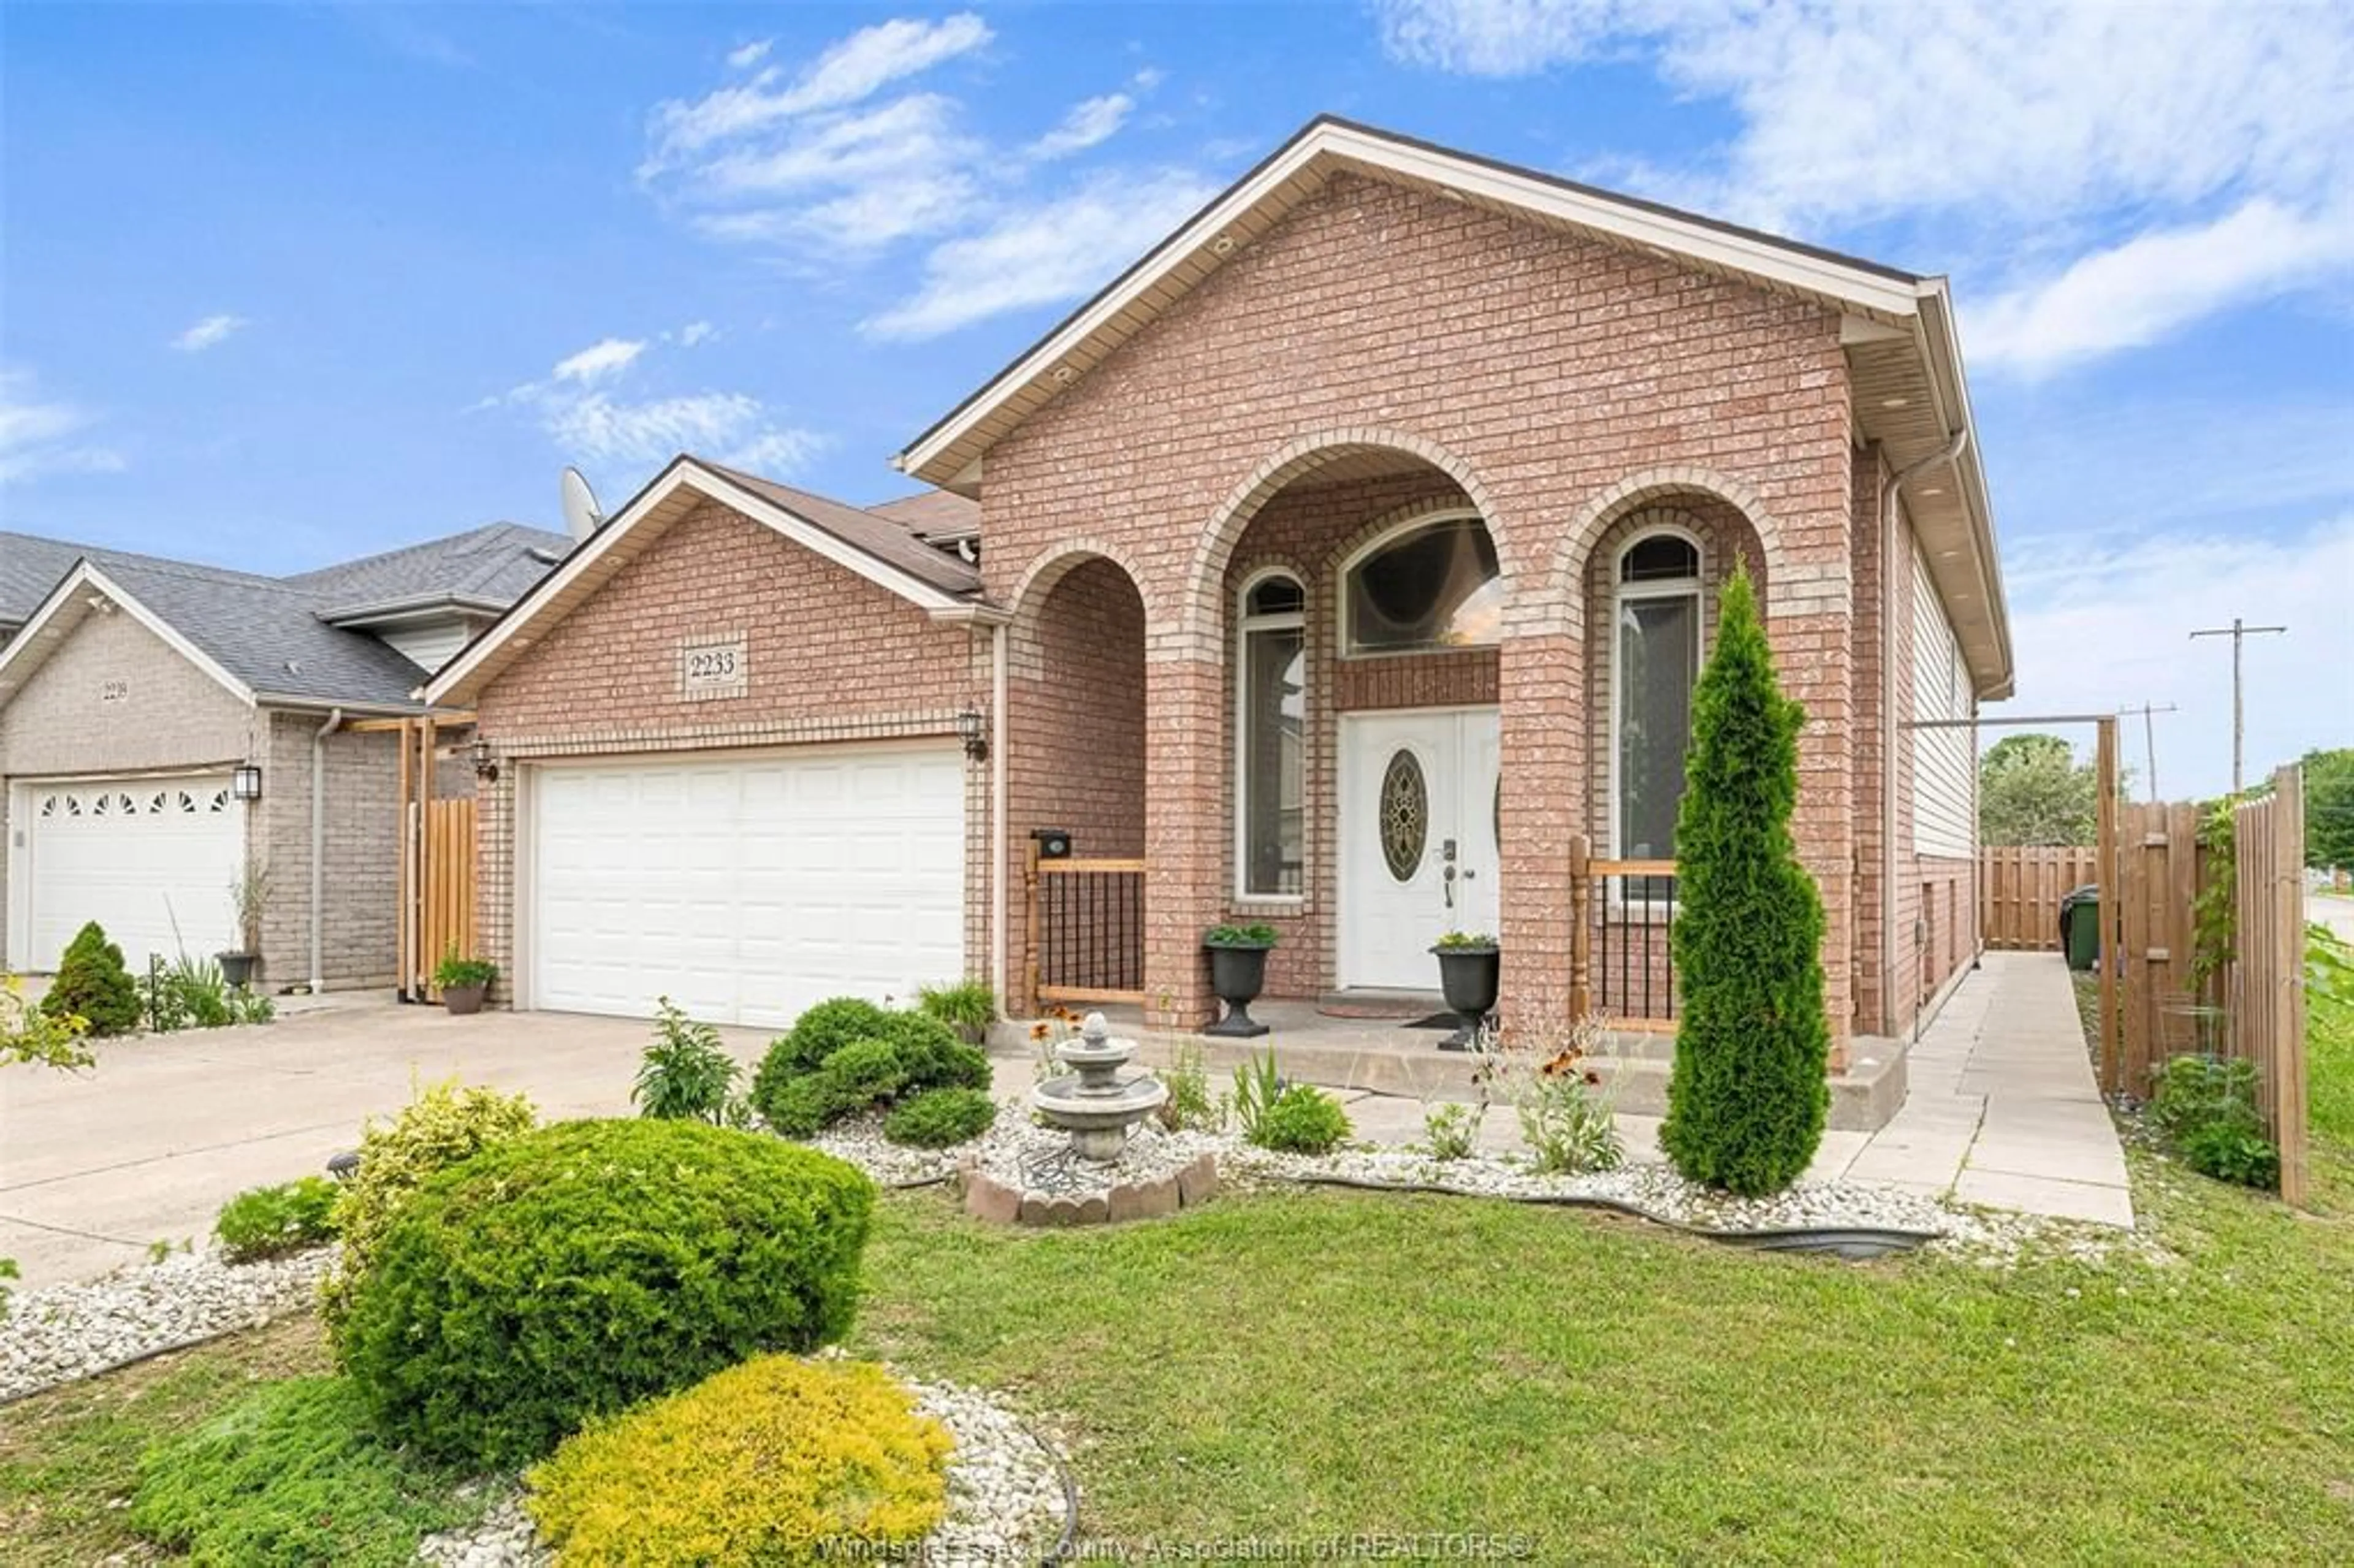 Home with brick exterior material for 2233 NORTHWAY, Windsor Ontario N9B 3Y3